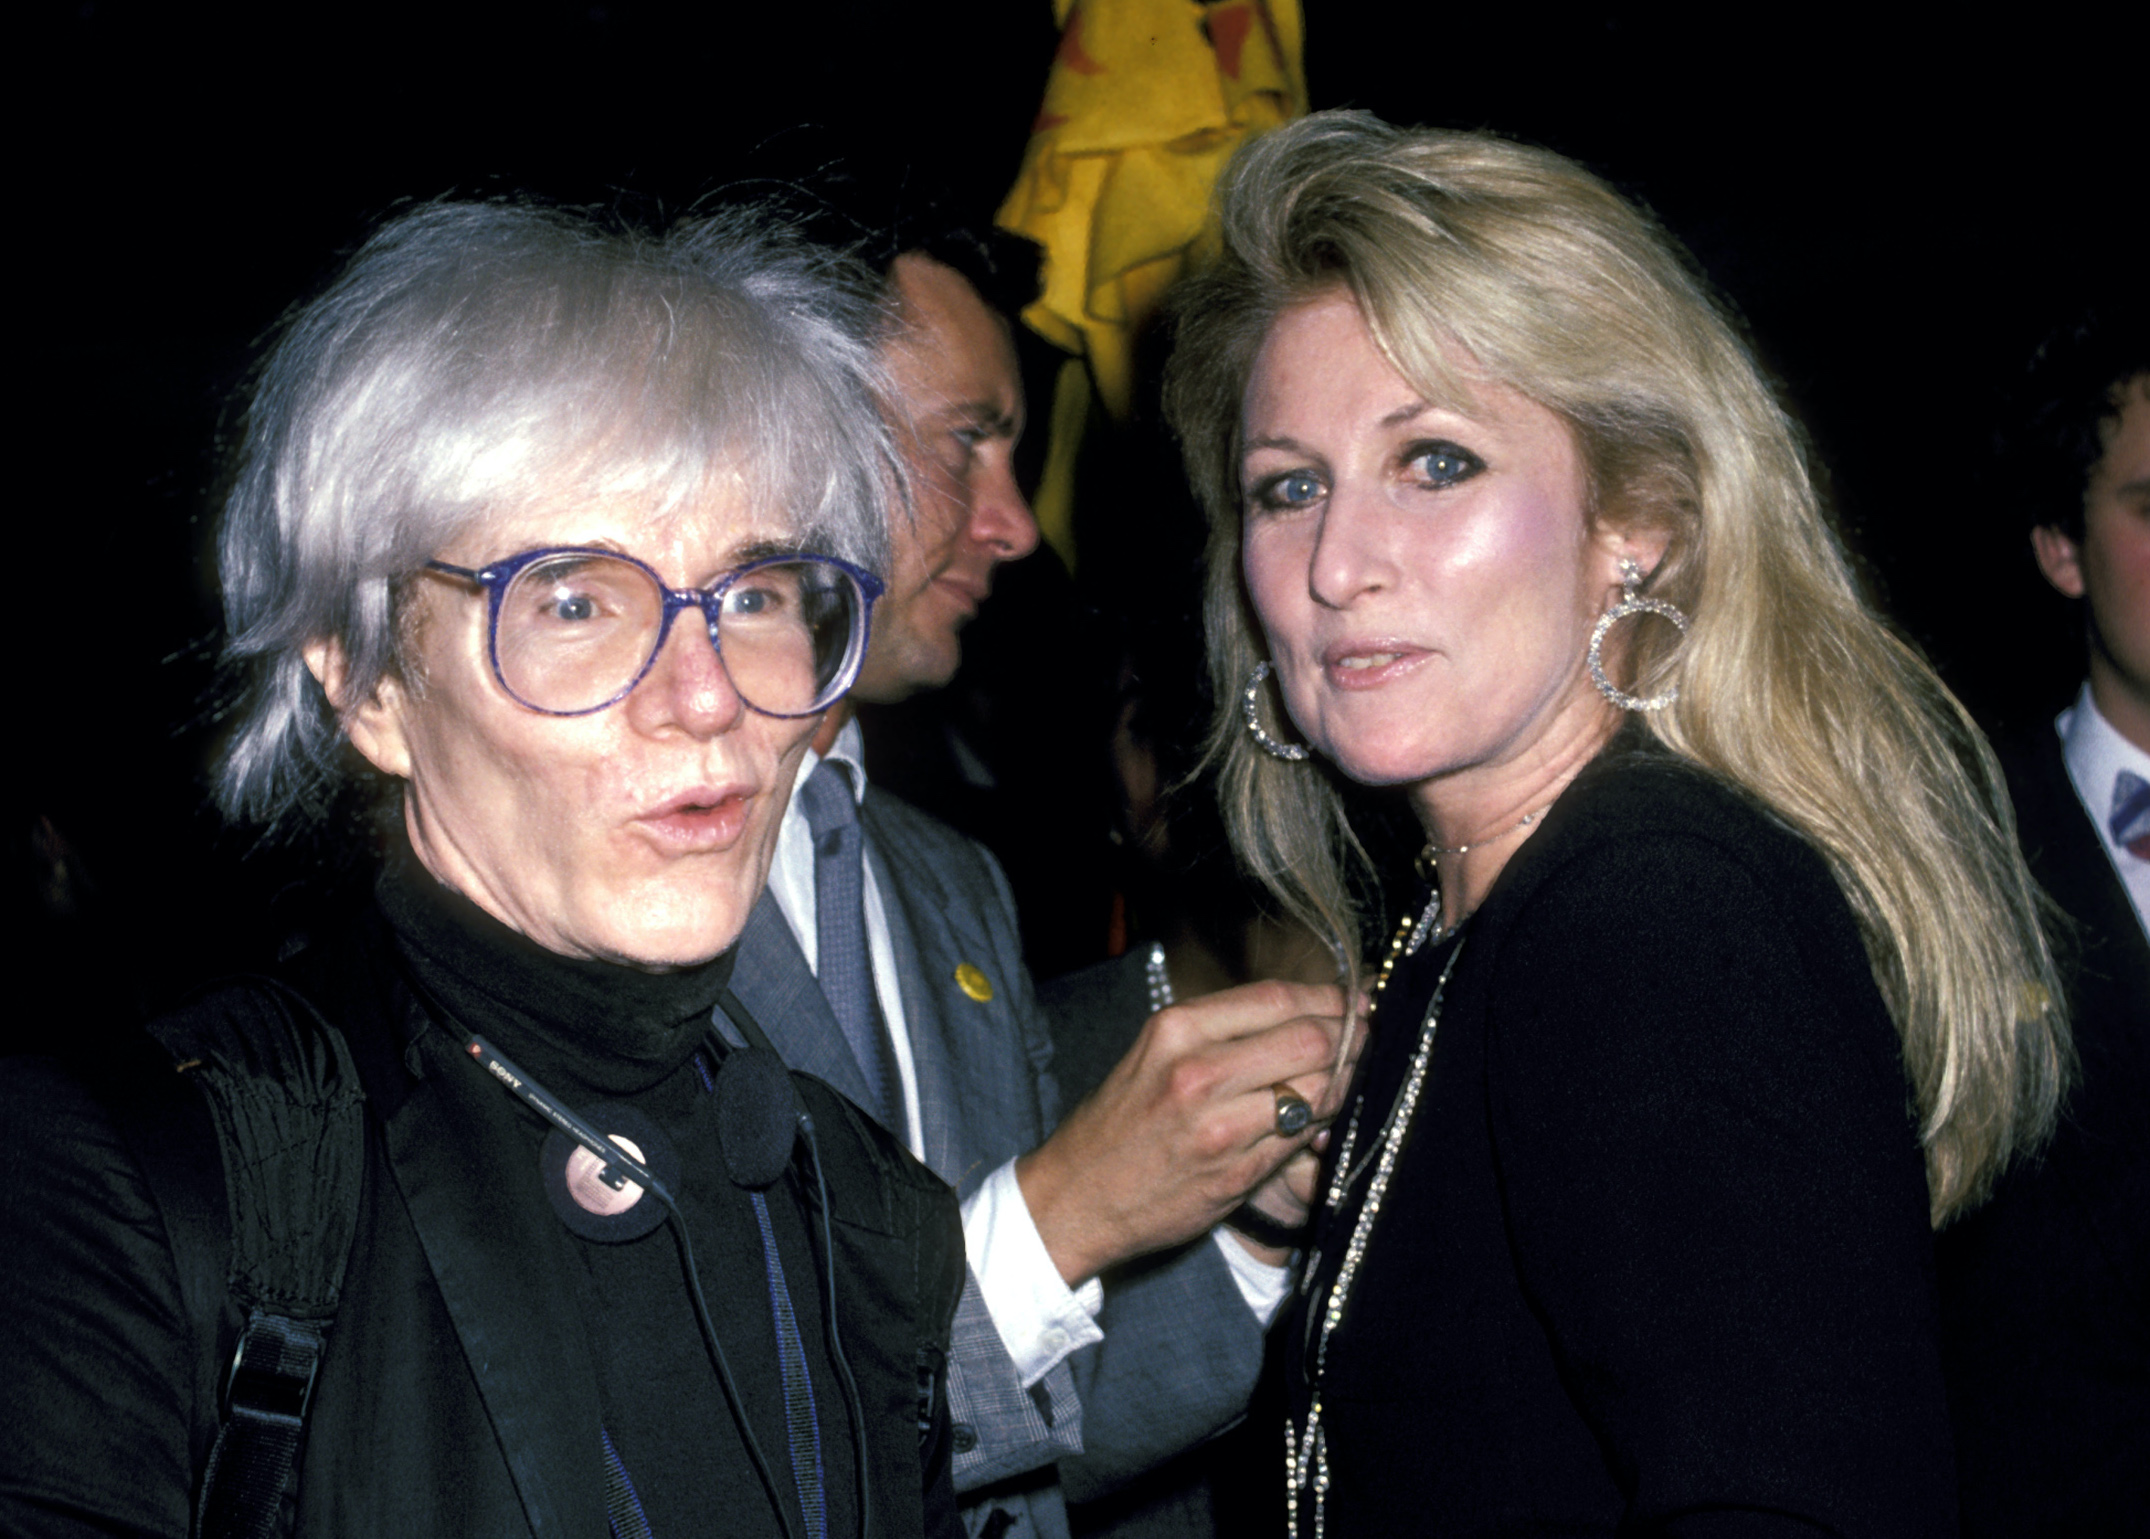 Andy Warhol standing next to young woman with long blonde hair.